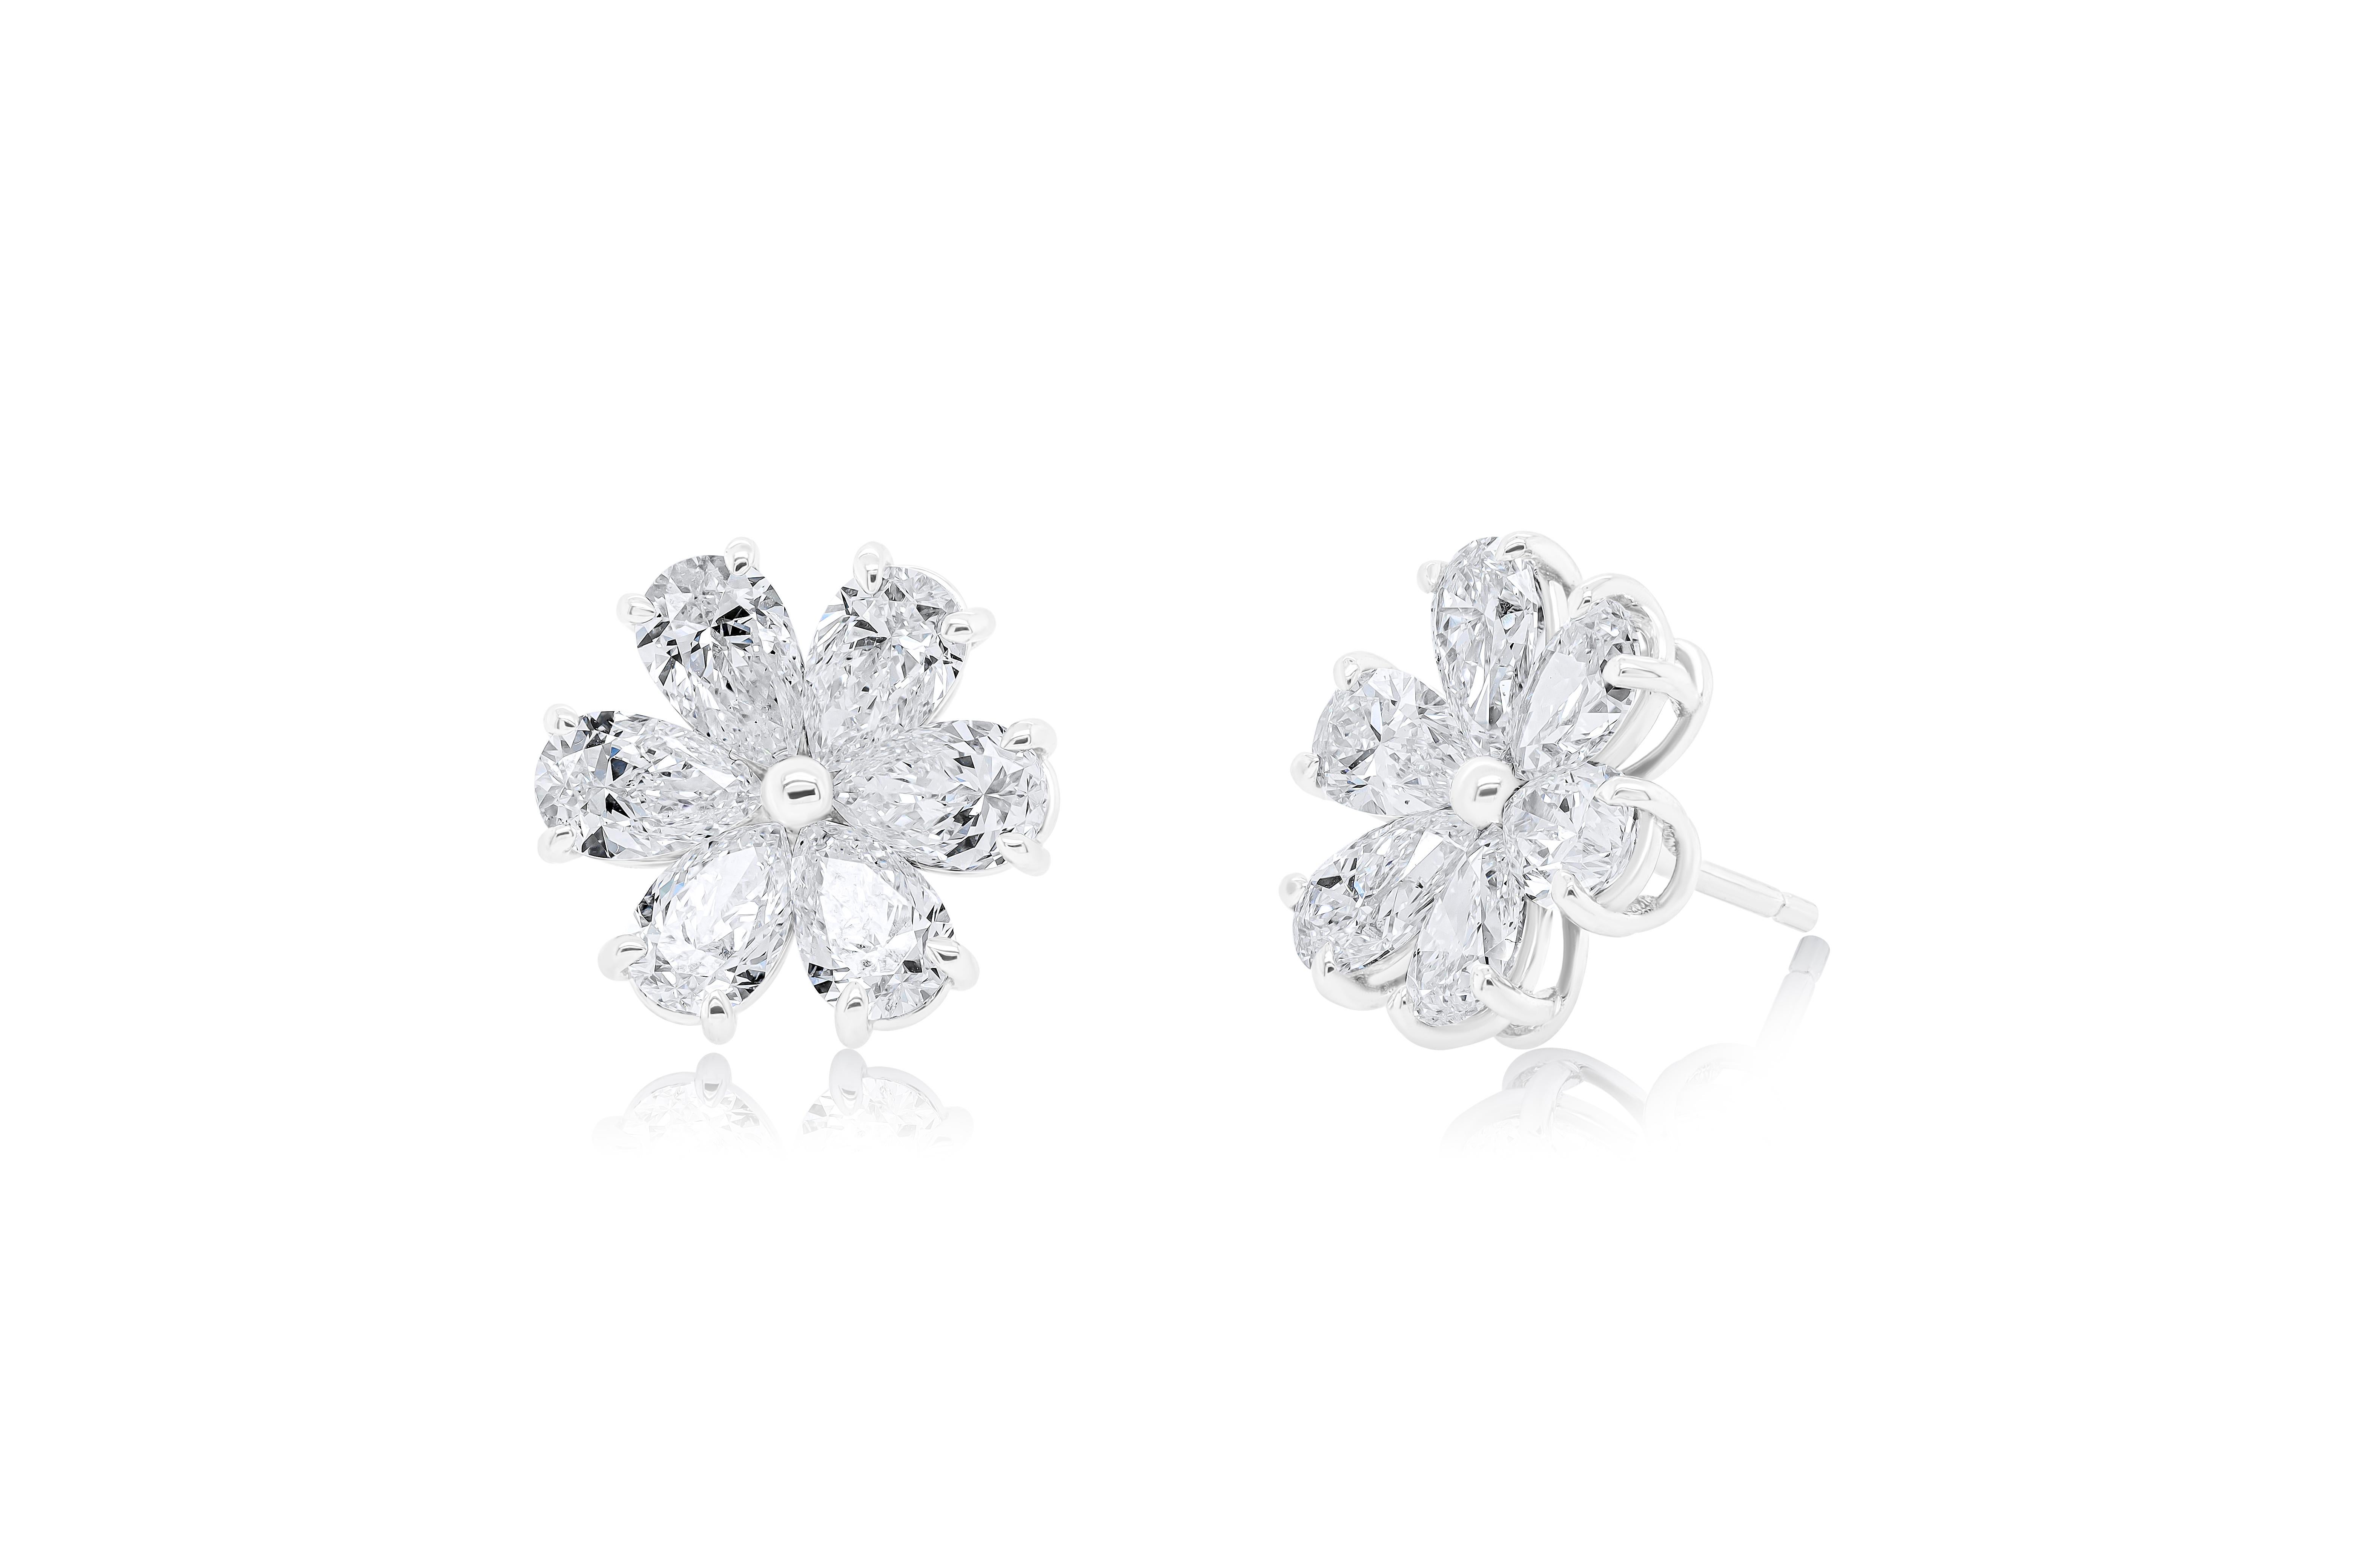 18KT White Gold DIamond Flower Earrings features all GIA Certified Diamonds total diamond weight 6.01 Carats D - G in Color VS-SI in Clarity Each diamond comes with GIA Report